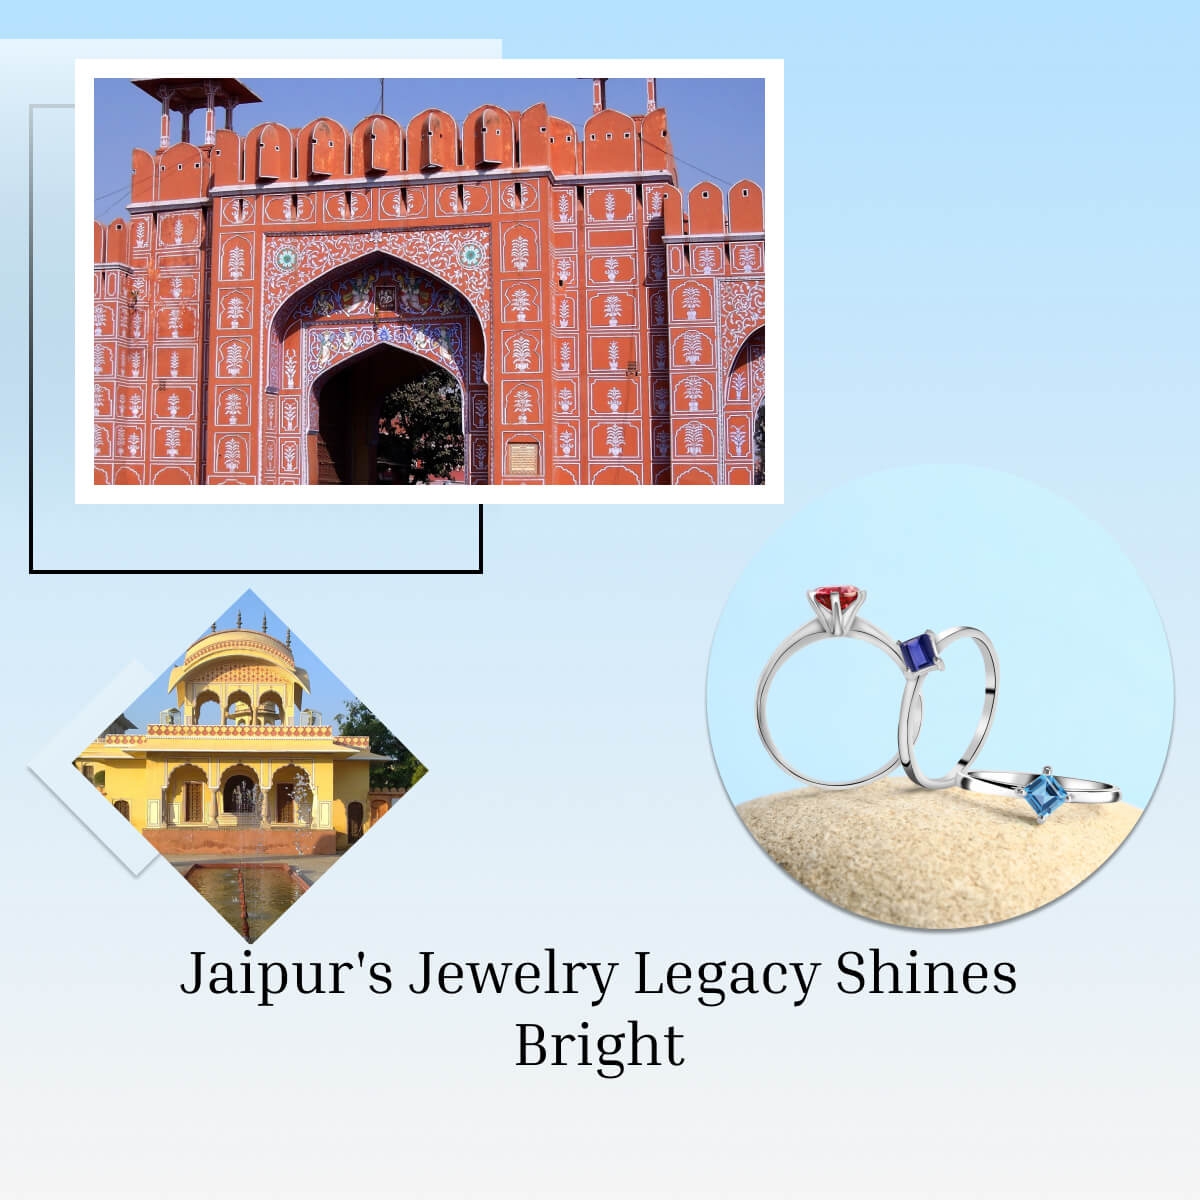 Rich Legacy of Jewelry Making in Jaipur